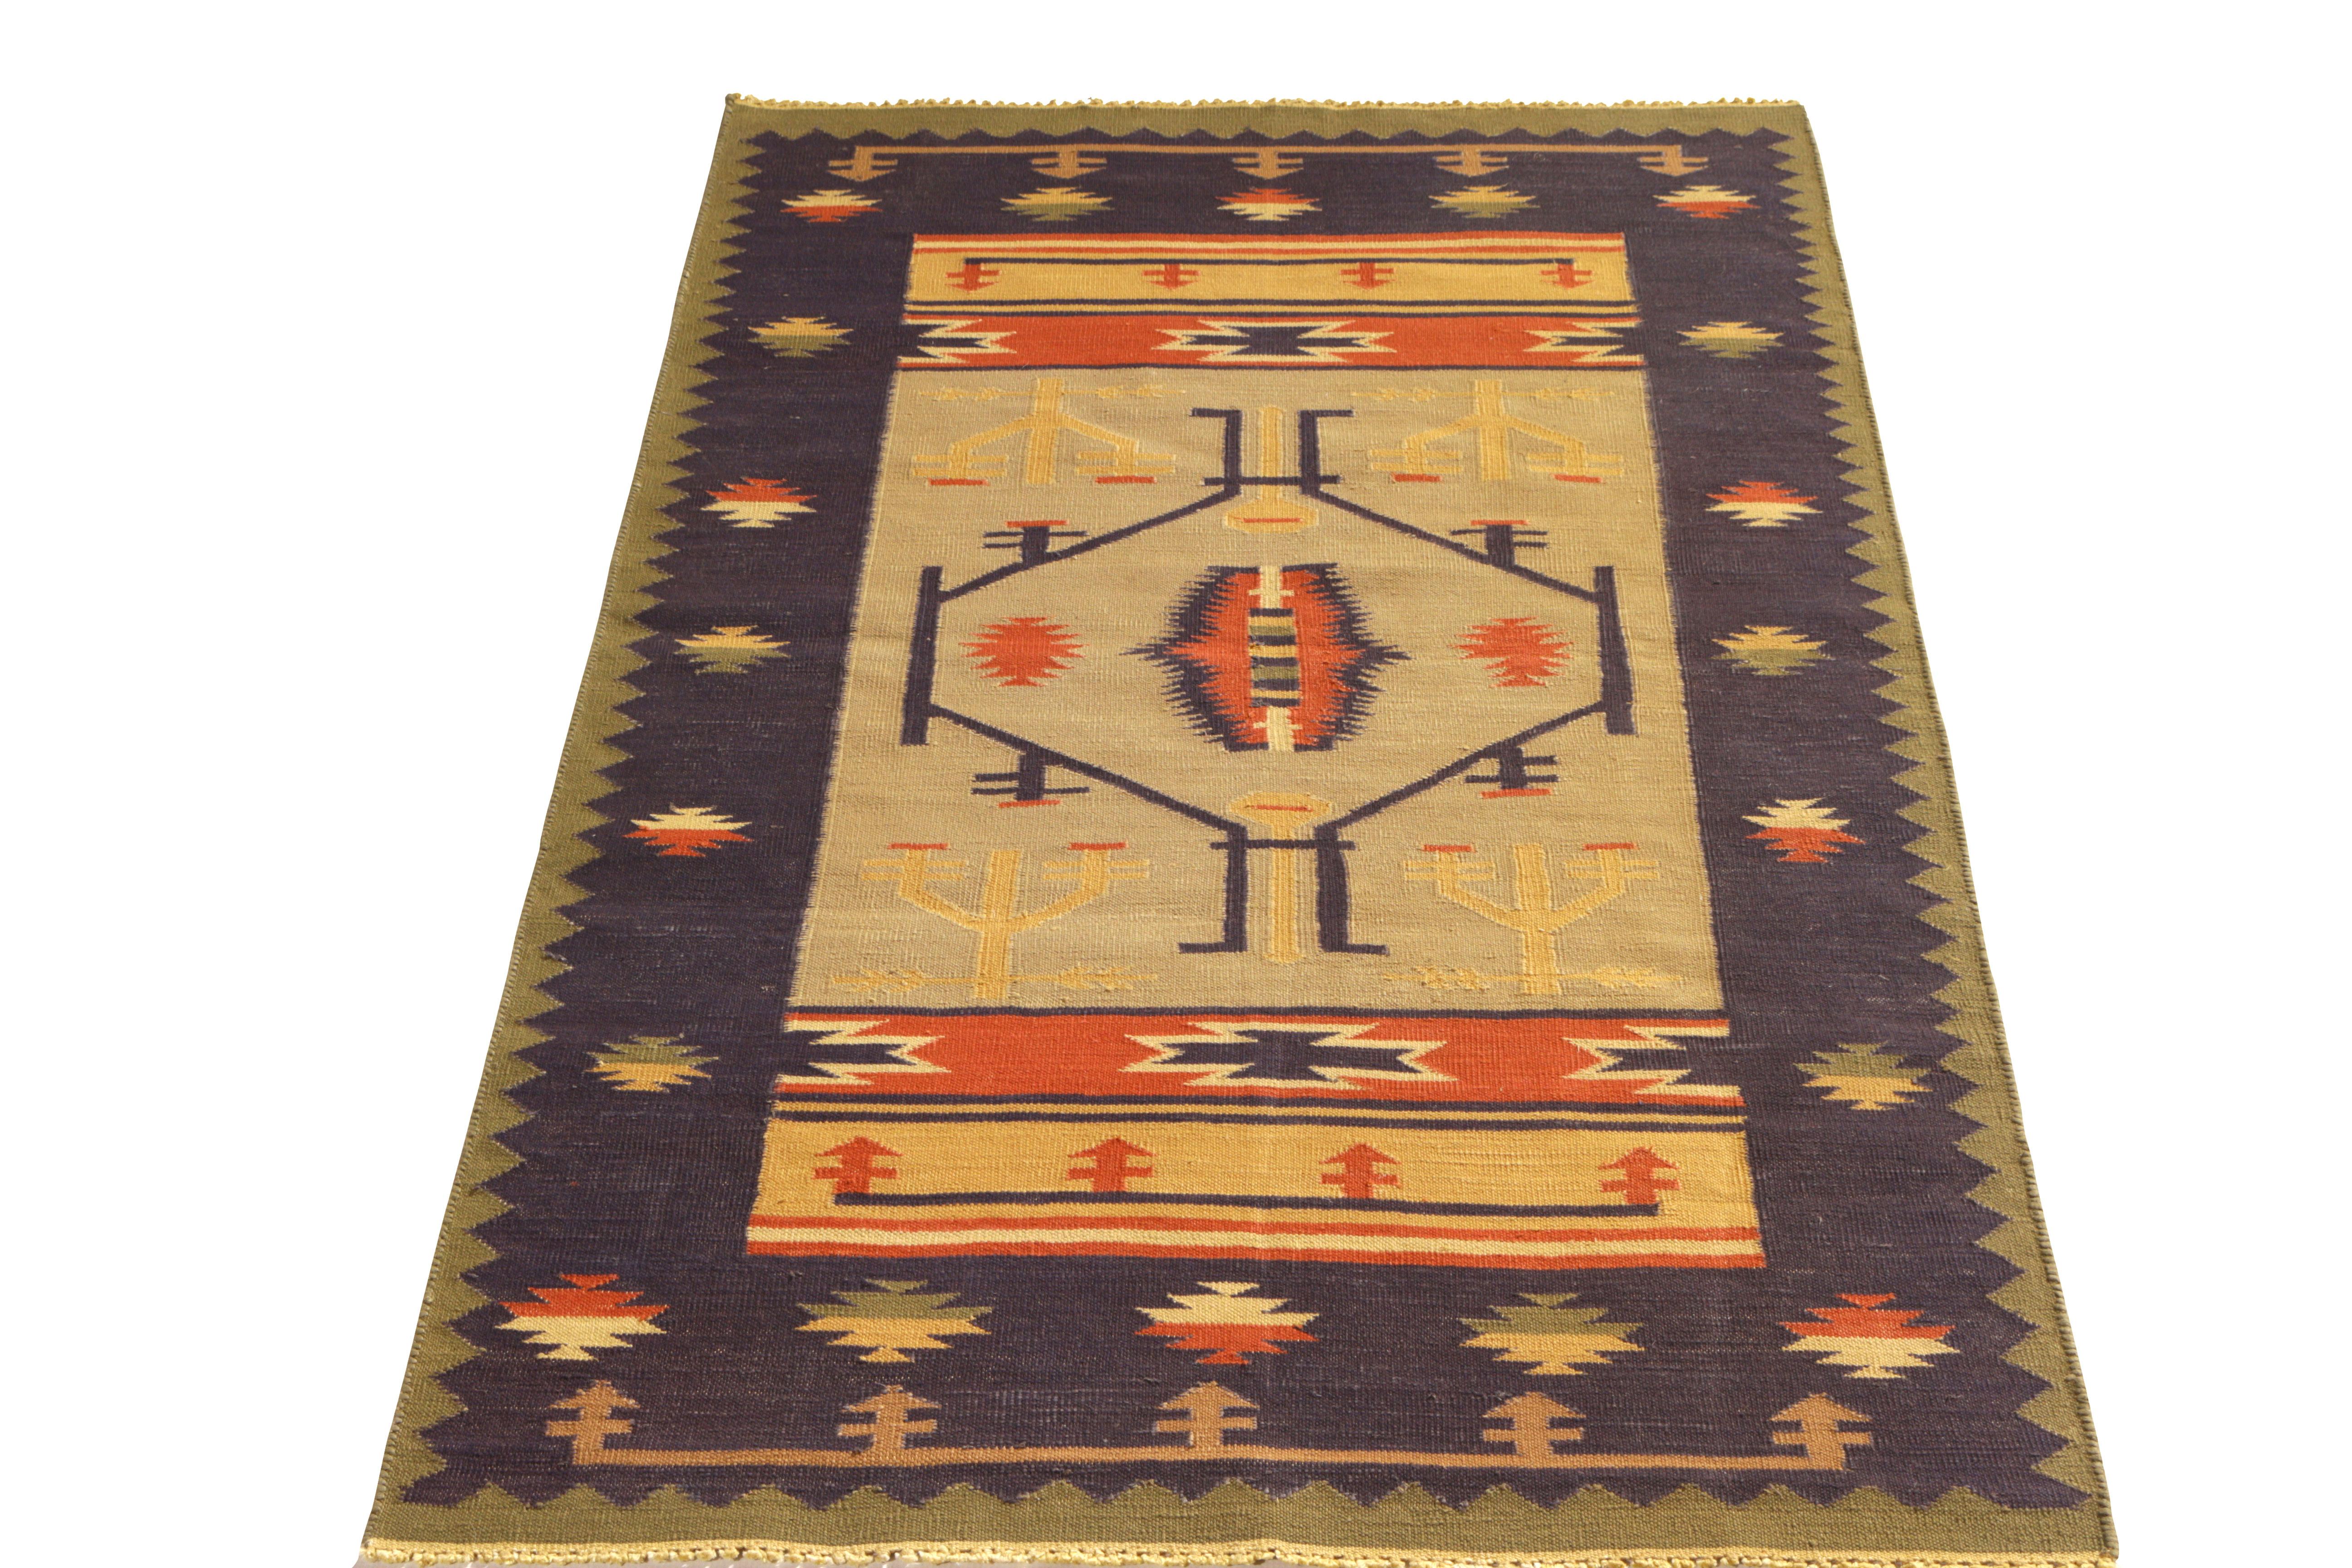 This handwoven cotton flat-weave rug enjoys a complementary play of tribal blue, gold, and red hues in a versatile 3 x 5 size. A welcome addition to the Kilim & flat-weave collection by Rug & Kilim. Ideal for small-size spaces and those seeking